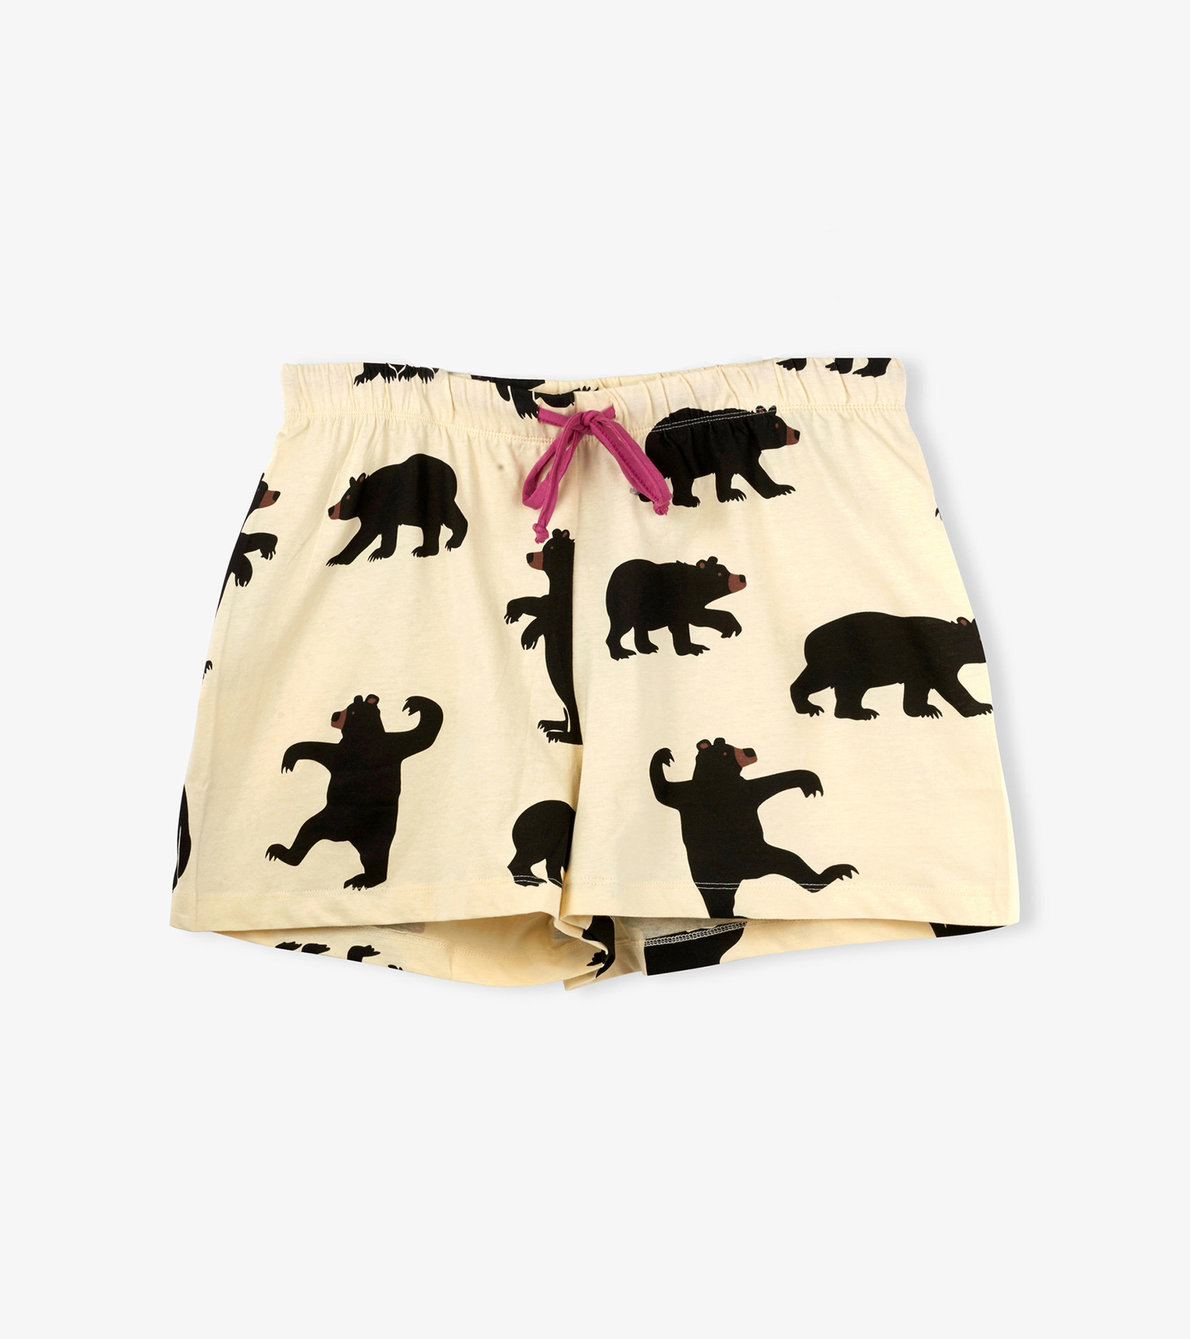 View larger image of Black Bears on Natural Women's Sleep Shorts